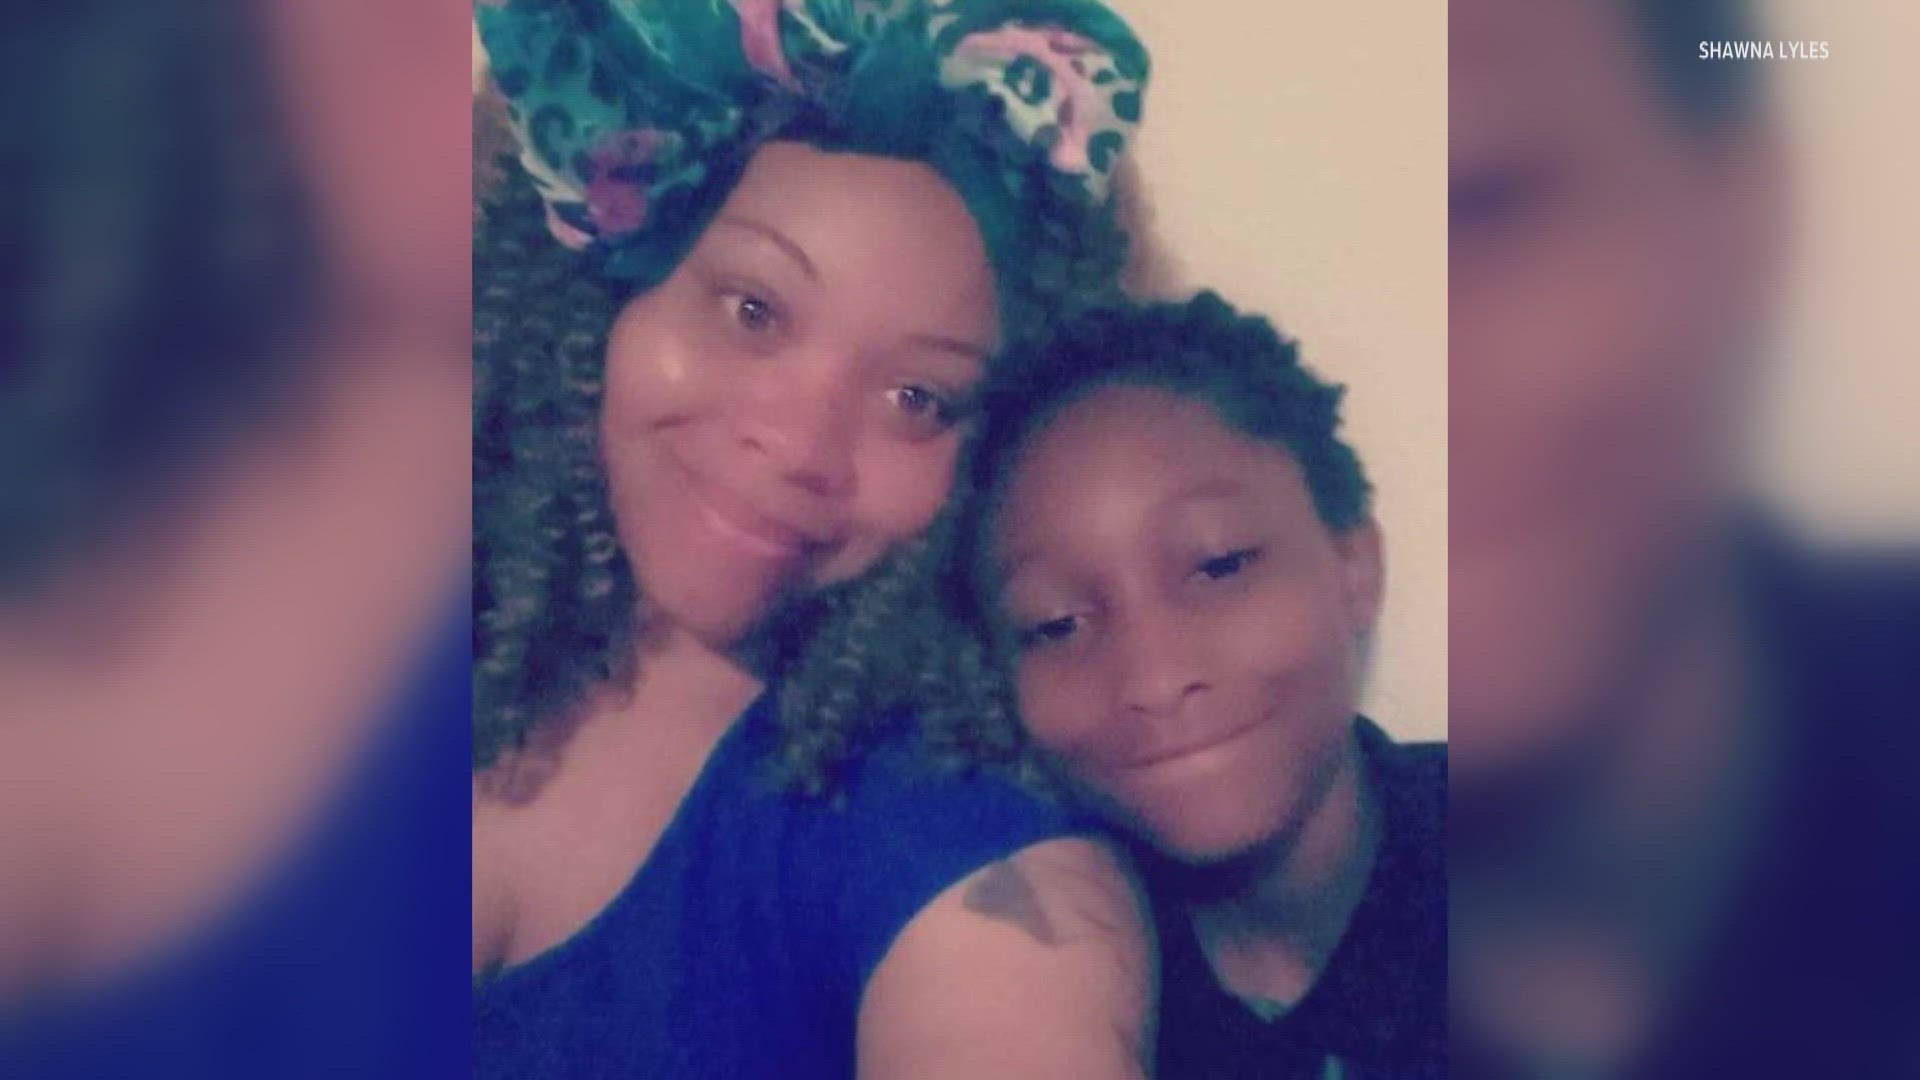 The mother of a 13-year-old boy who was shot and killed at an eastside apartment complex is speaking out as police try to figure out who pulled the trigger.